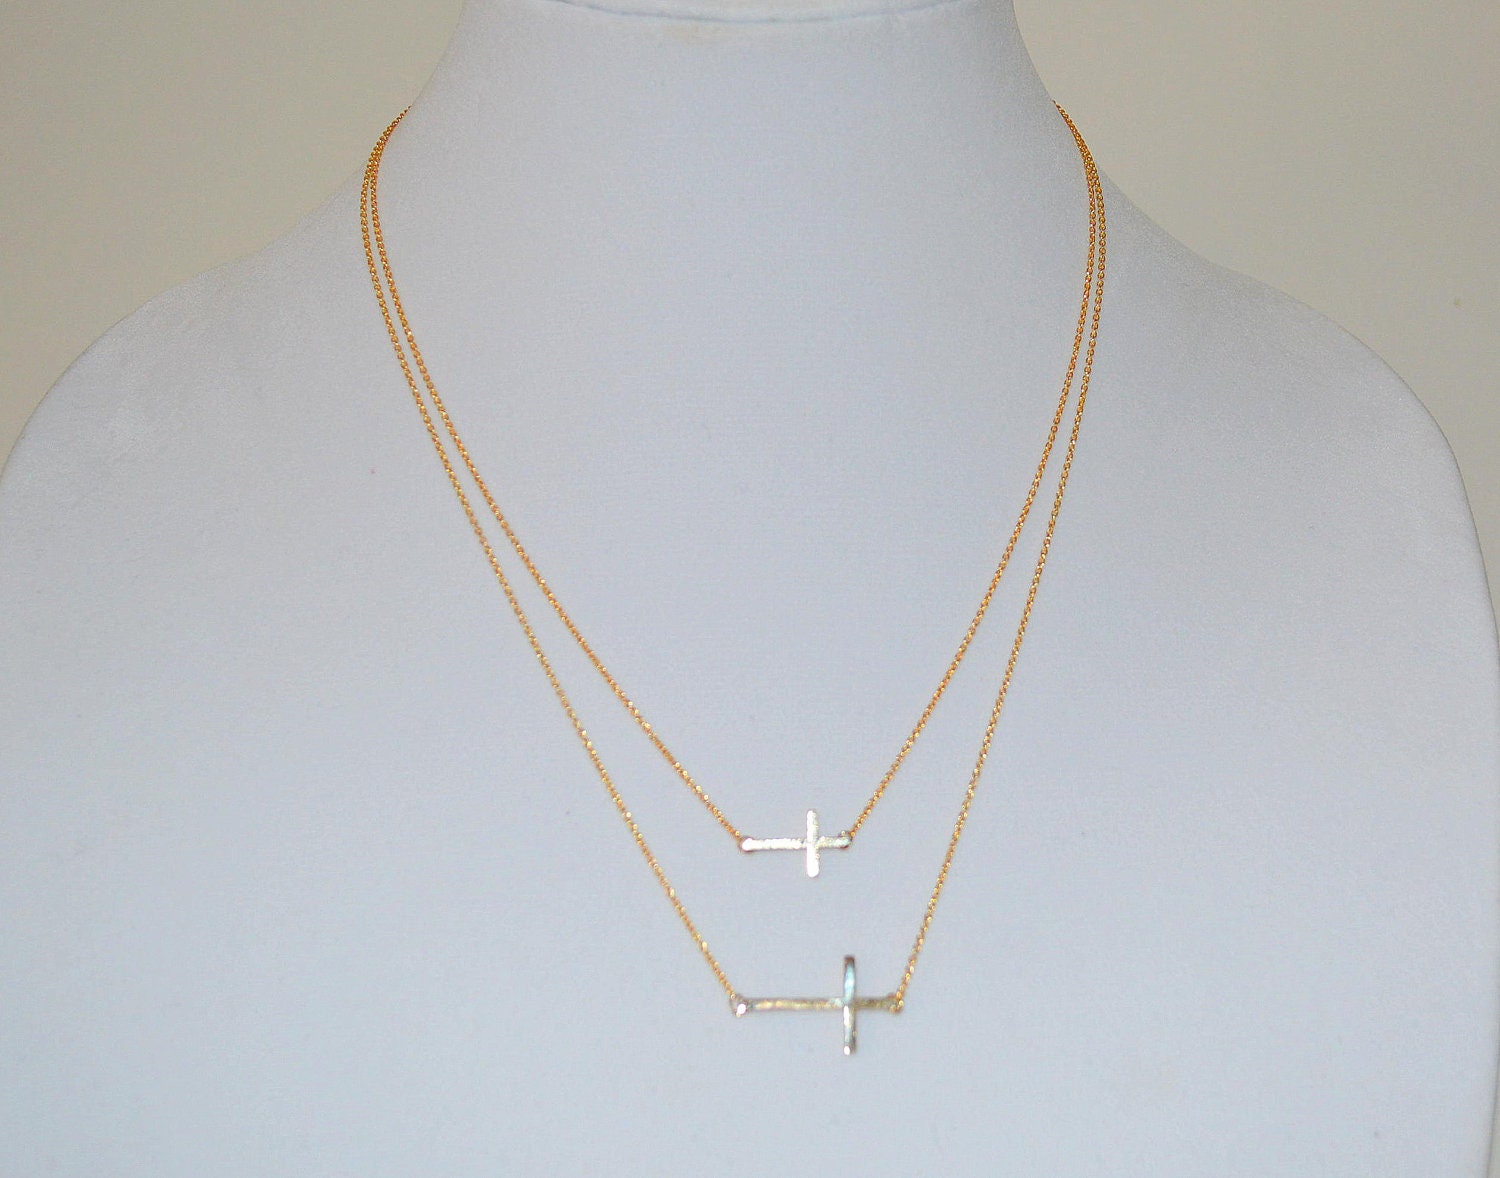 SALE- Double Sideway Cross Necklace- CELEBRITY INSPIRED- Cross Gold Necklace- Ships Now